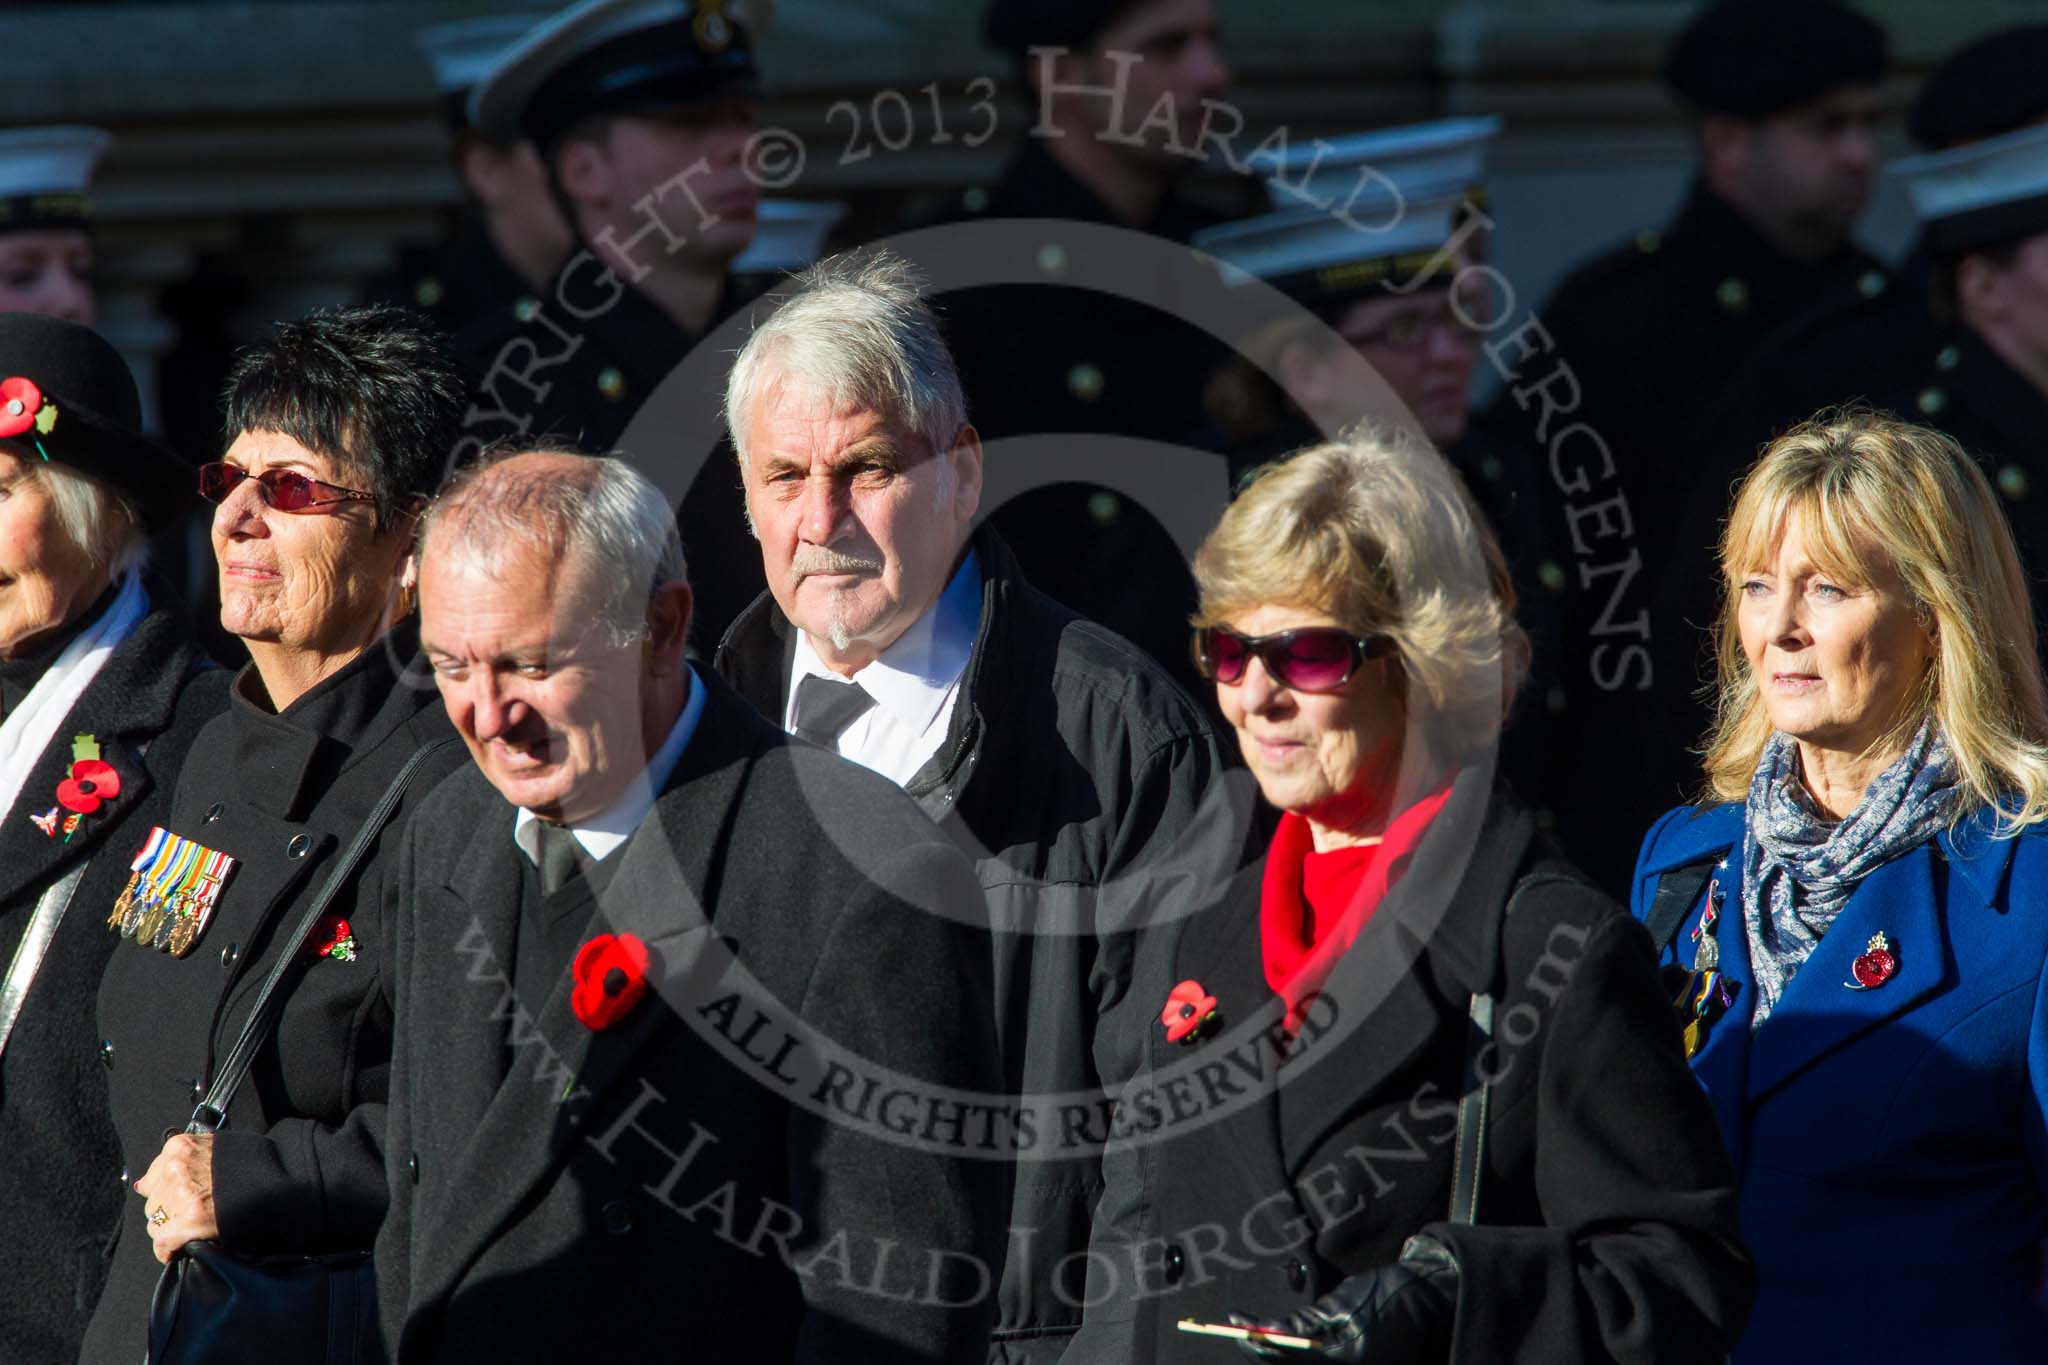 Remembrance Sunday at the Cenotaph in London 2014: Group M23 - Civilians Representing Families.
Press stand opposite the Foreign Office building, Whitehall, London SW1,
London,
Greater London,
United Kingdom,
on 09 November 2014 at 12:18, image #2170